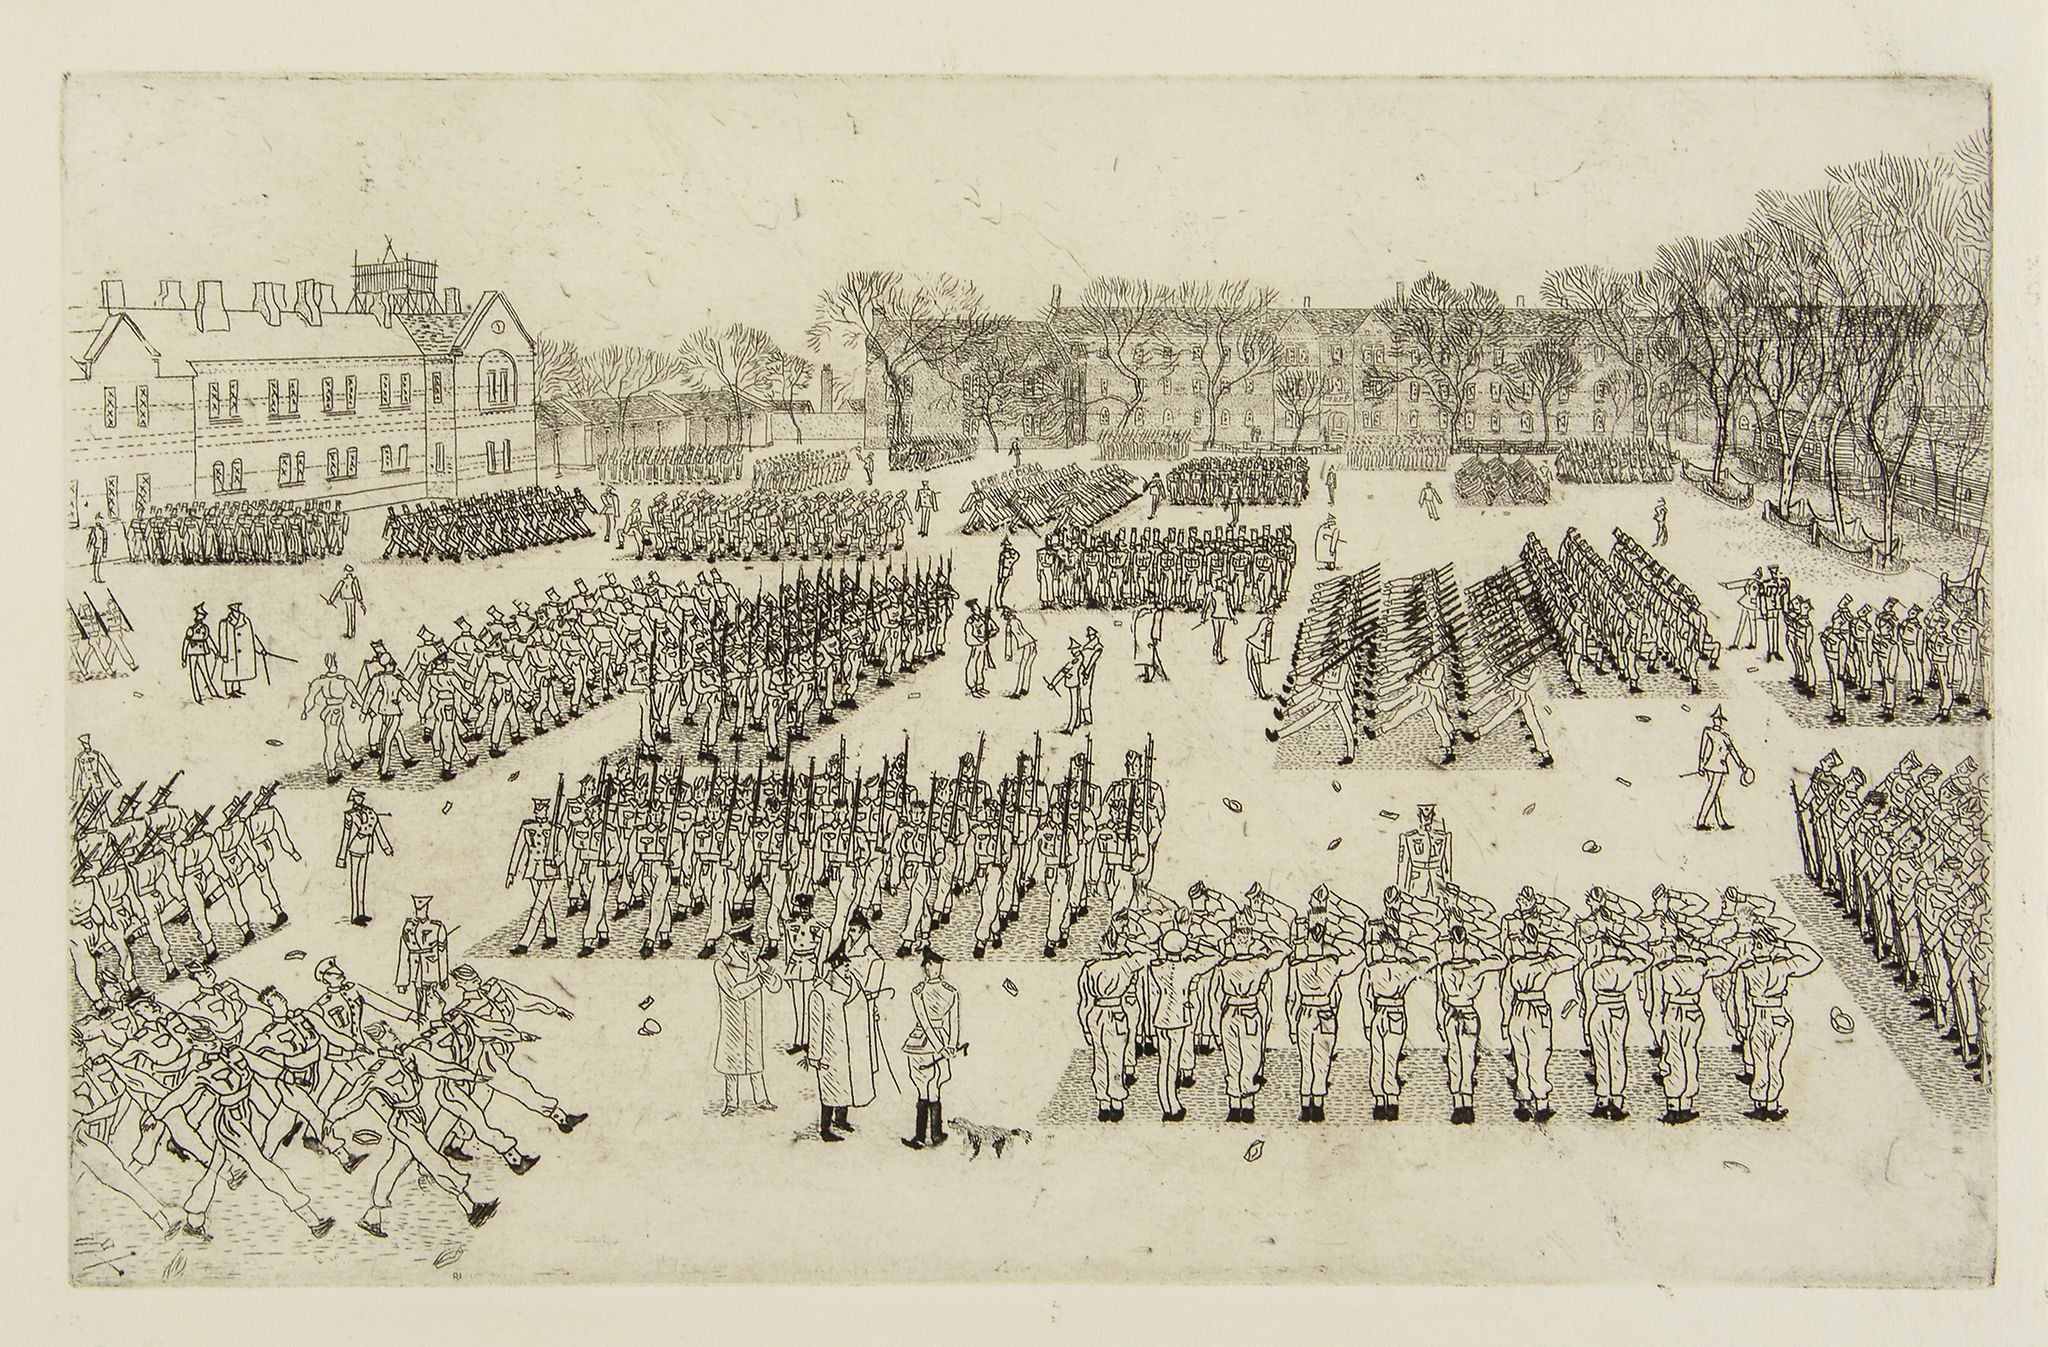 Anthony Gross (1905-1984) - 11 O'Clock Parade etching, 1940, on wove paper, with margins,  162 x 258